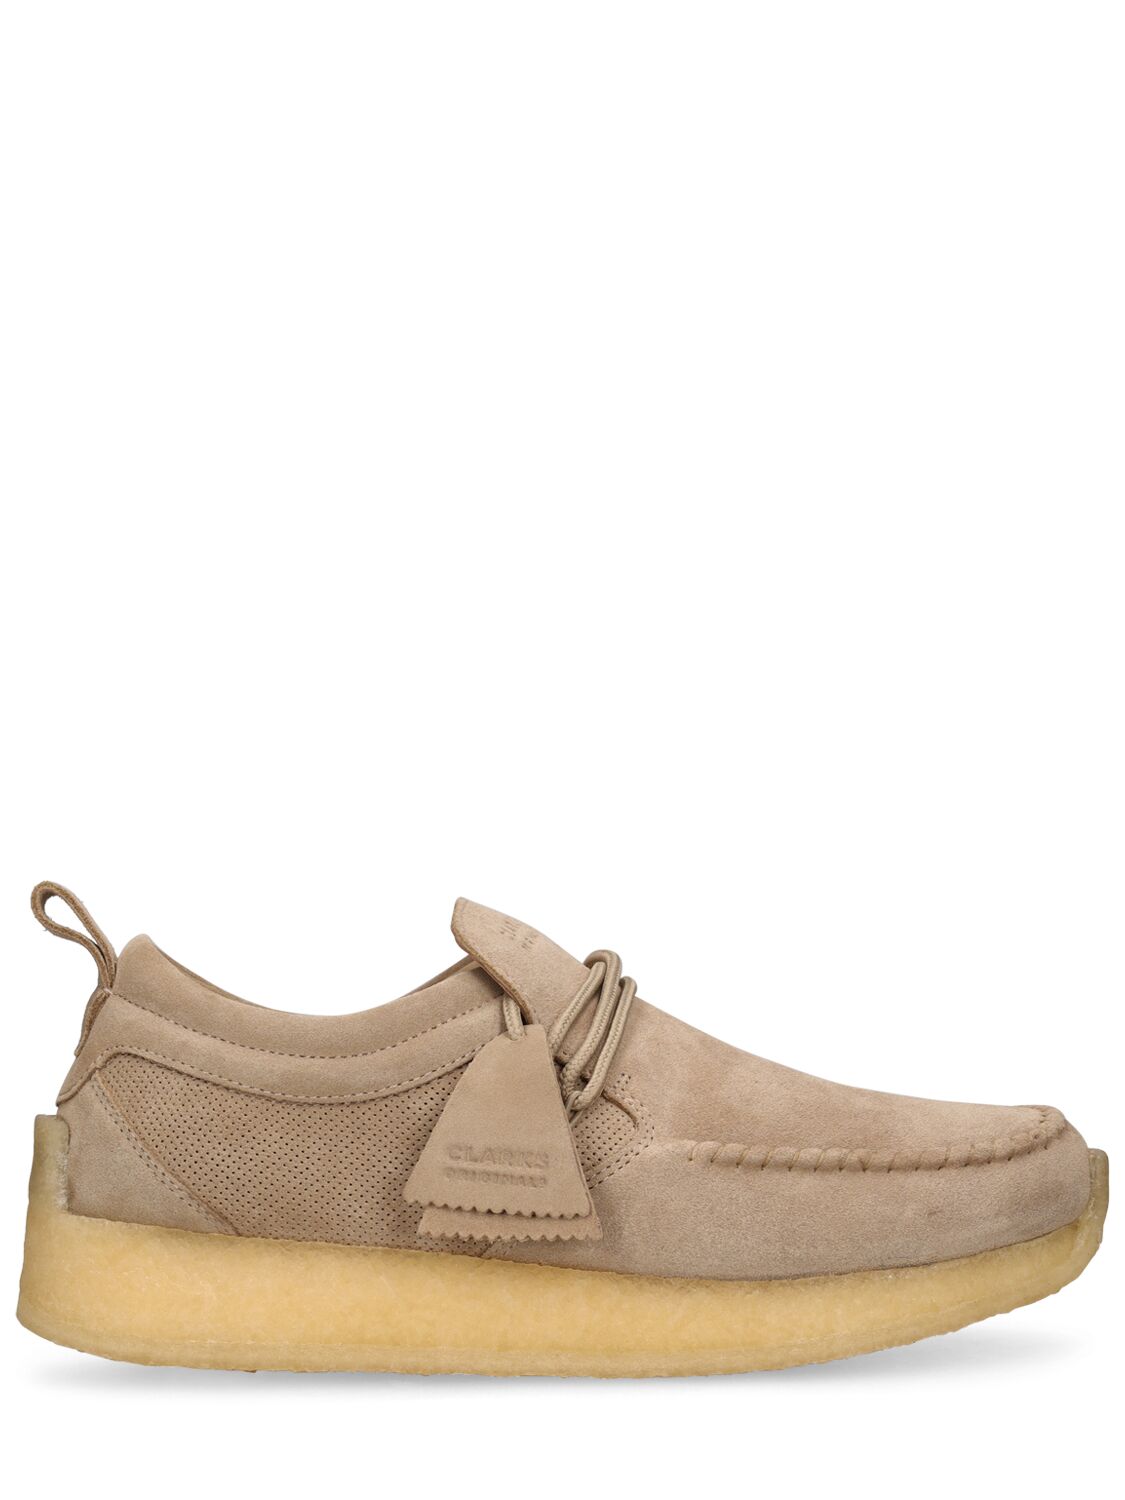 Image of Maycliffe Suede Lace-up Shoes